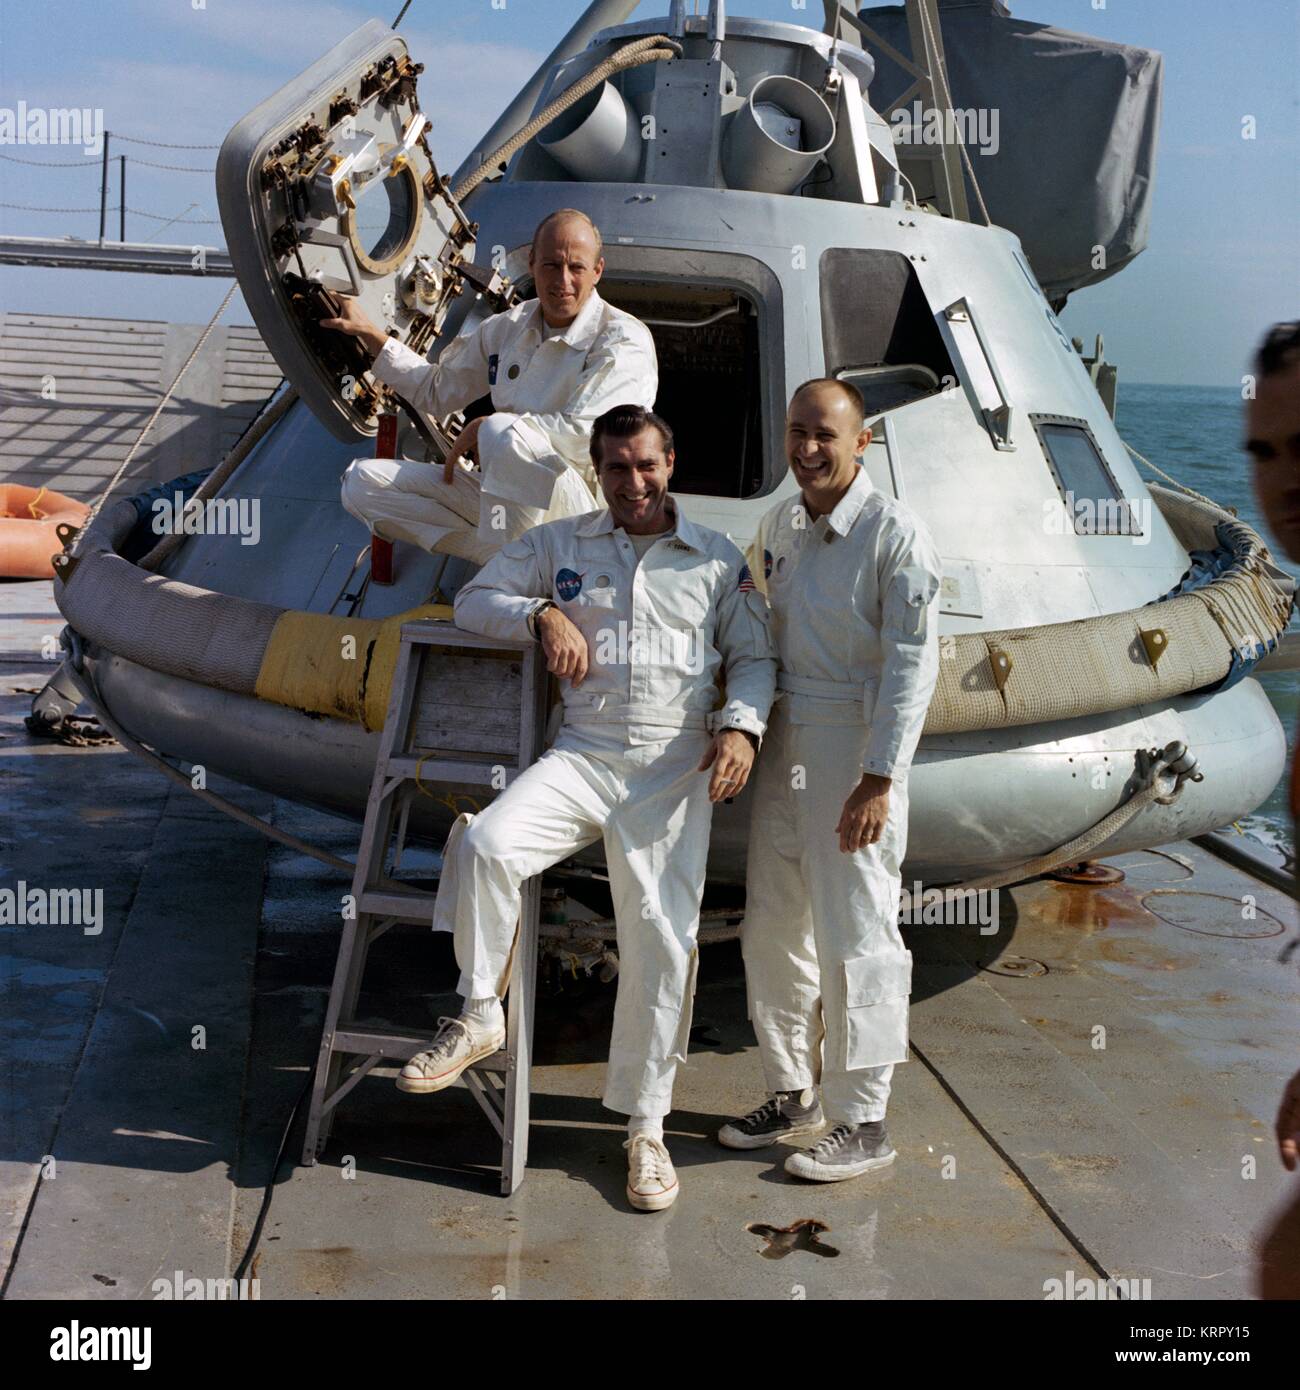 NASA Apollo 9 lunar orbital mission backup crew members American astronauts Charles Pete Conrad Jr. (left), Richard Gordon Jr., and Alan Bean stand on the deck of the Apollo command module trainer before water egress training November 5, 1968 in the Gulf of Mexico. Stock Photo